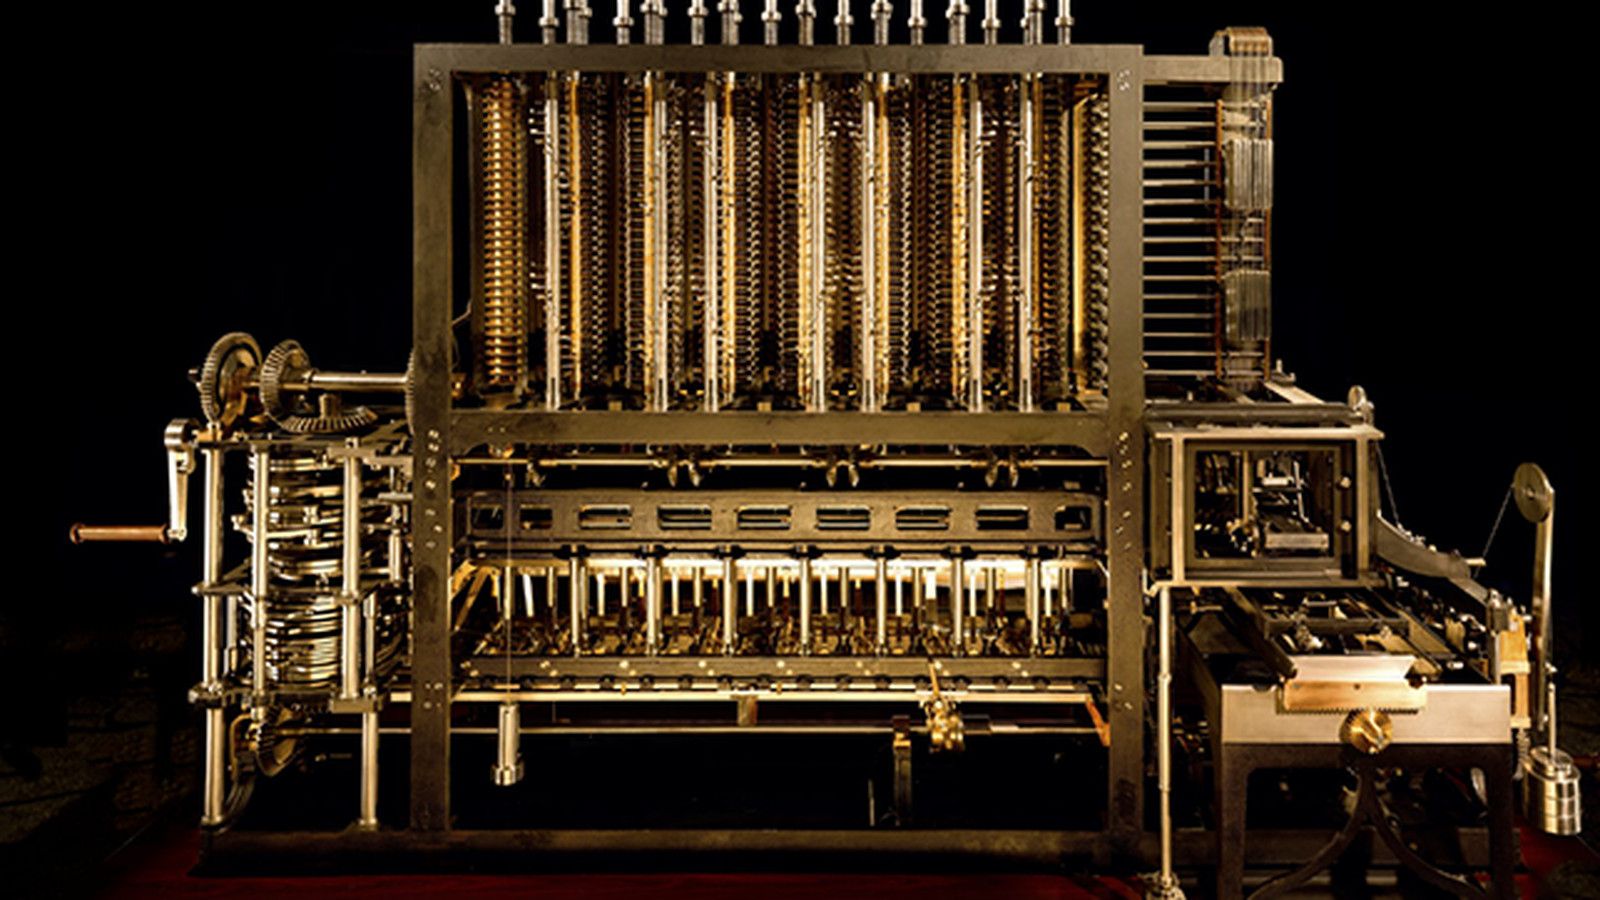 Charles Babbage's difference engine captured in gigapixel image